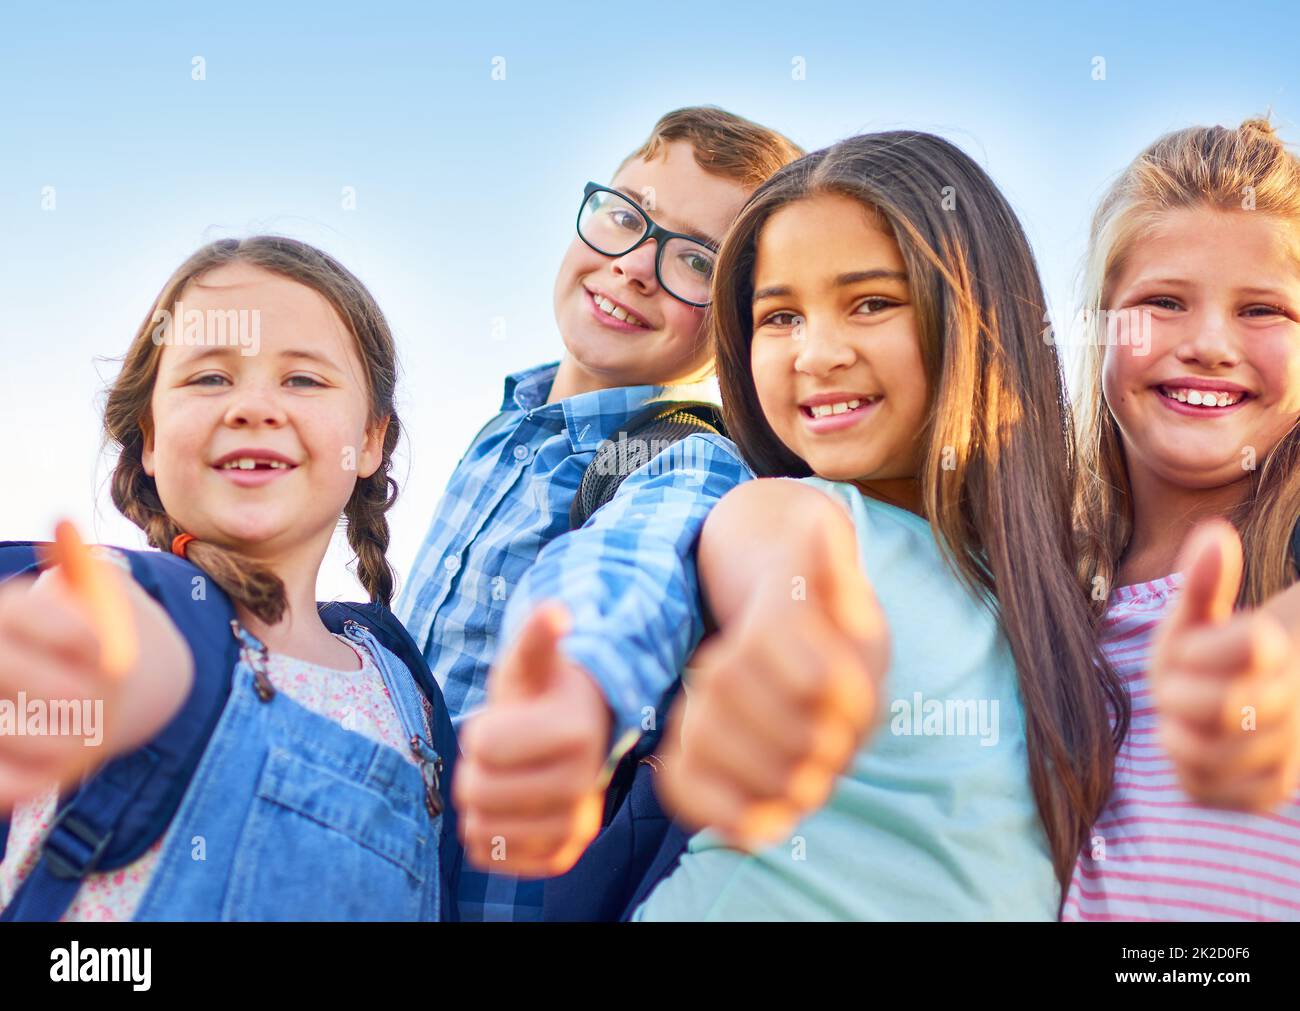 Be awesome today. Shot of a group of elementary school children together. Stock Photo